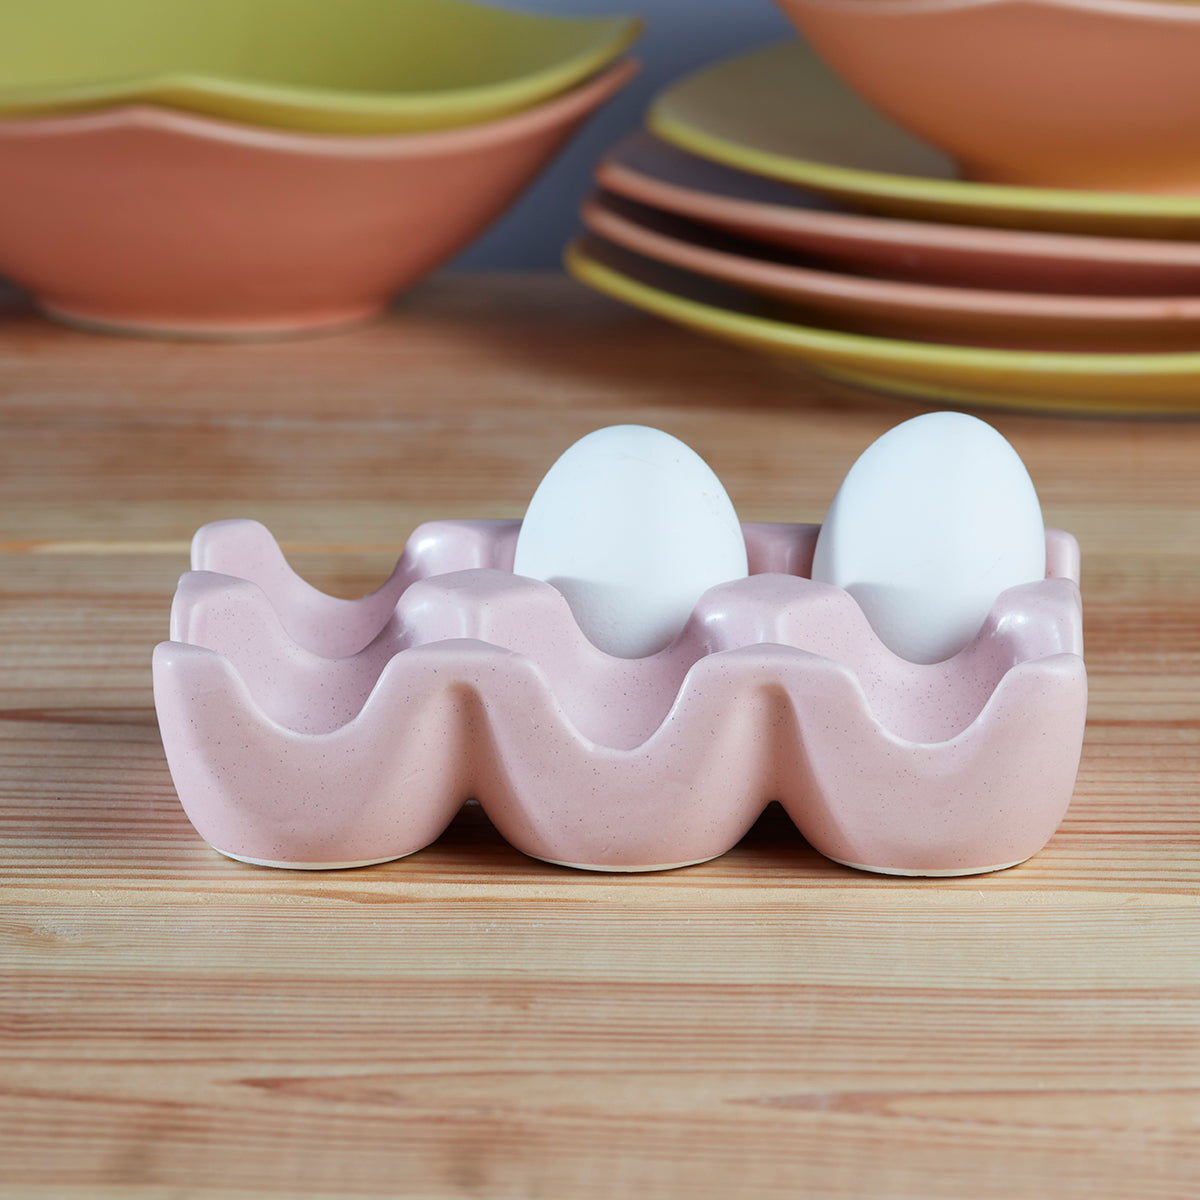 Ceramic 6 Egg Tray / Crate for countertop Refrigerator, Pink